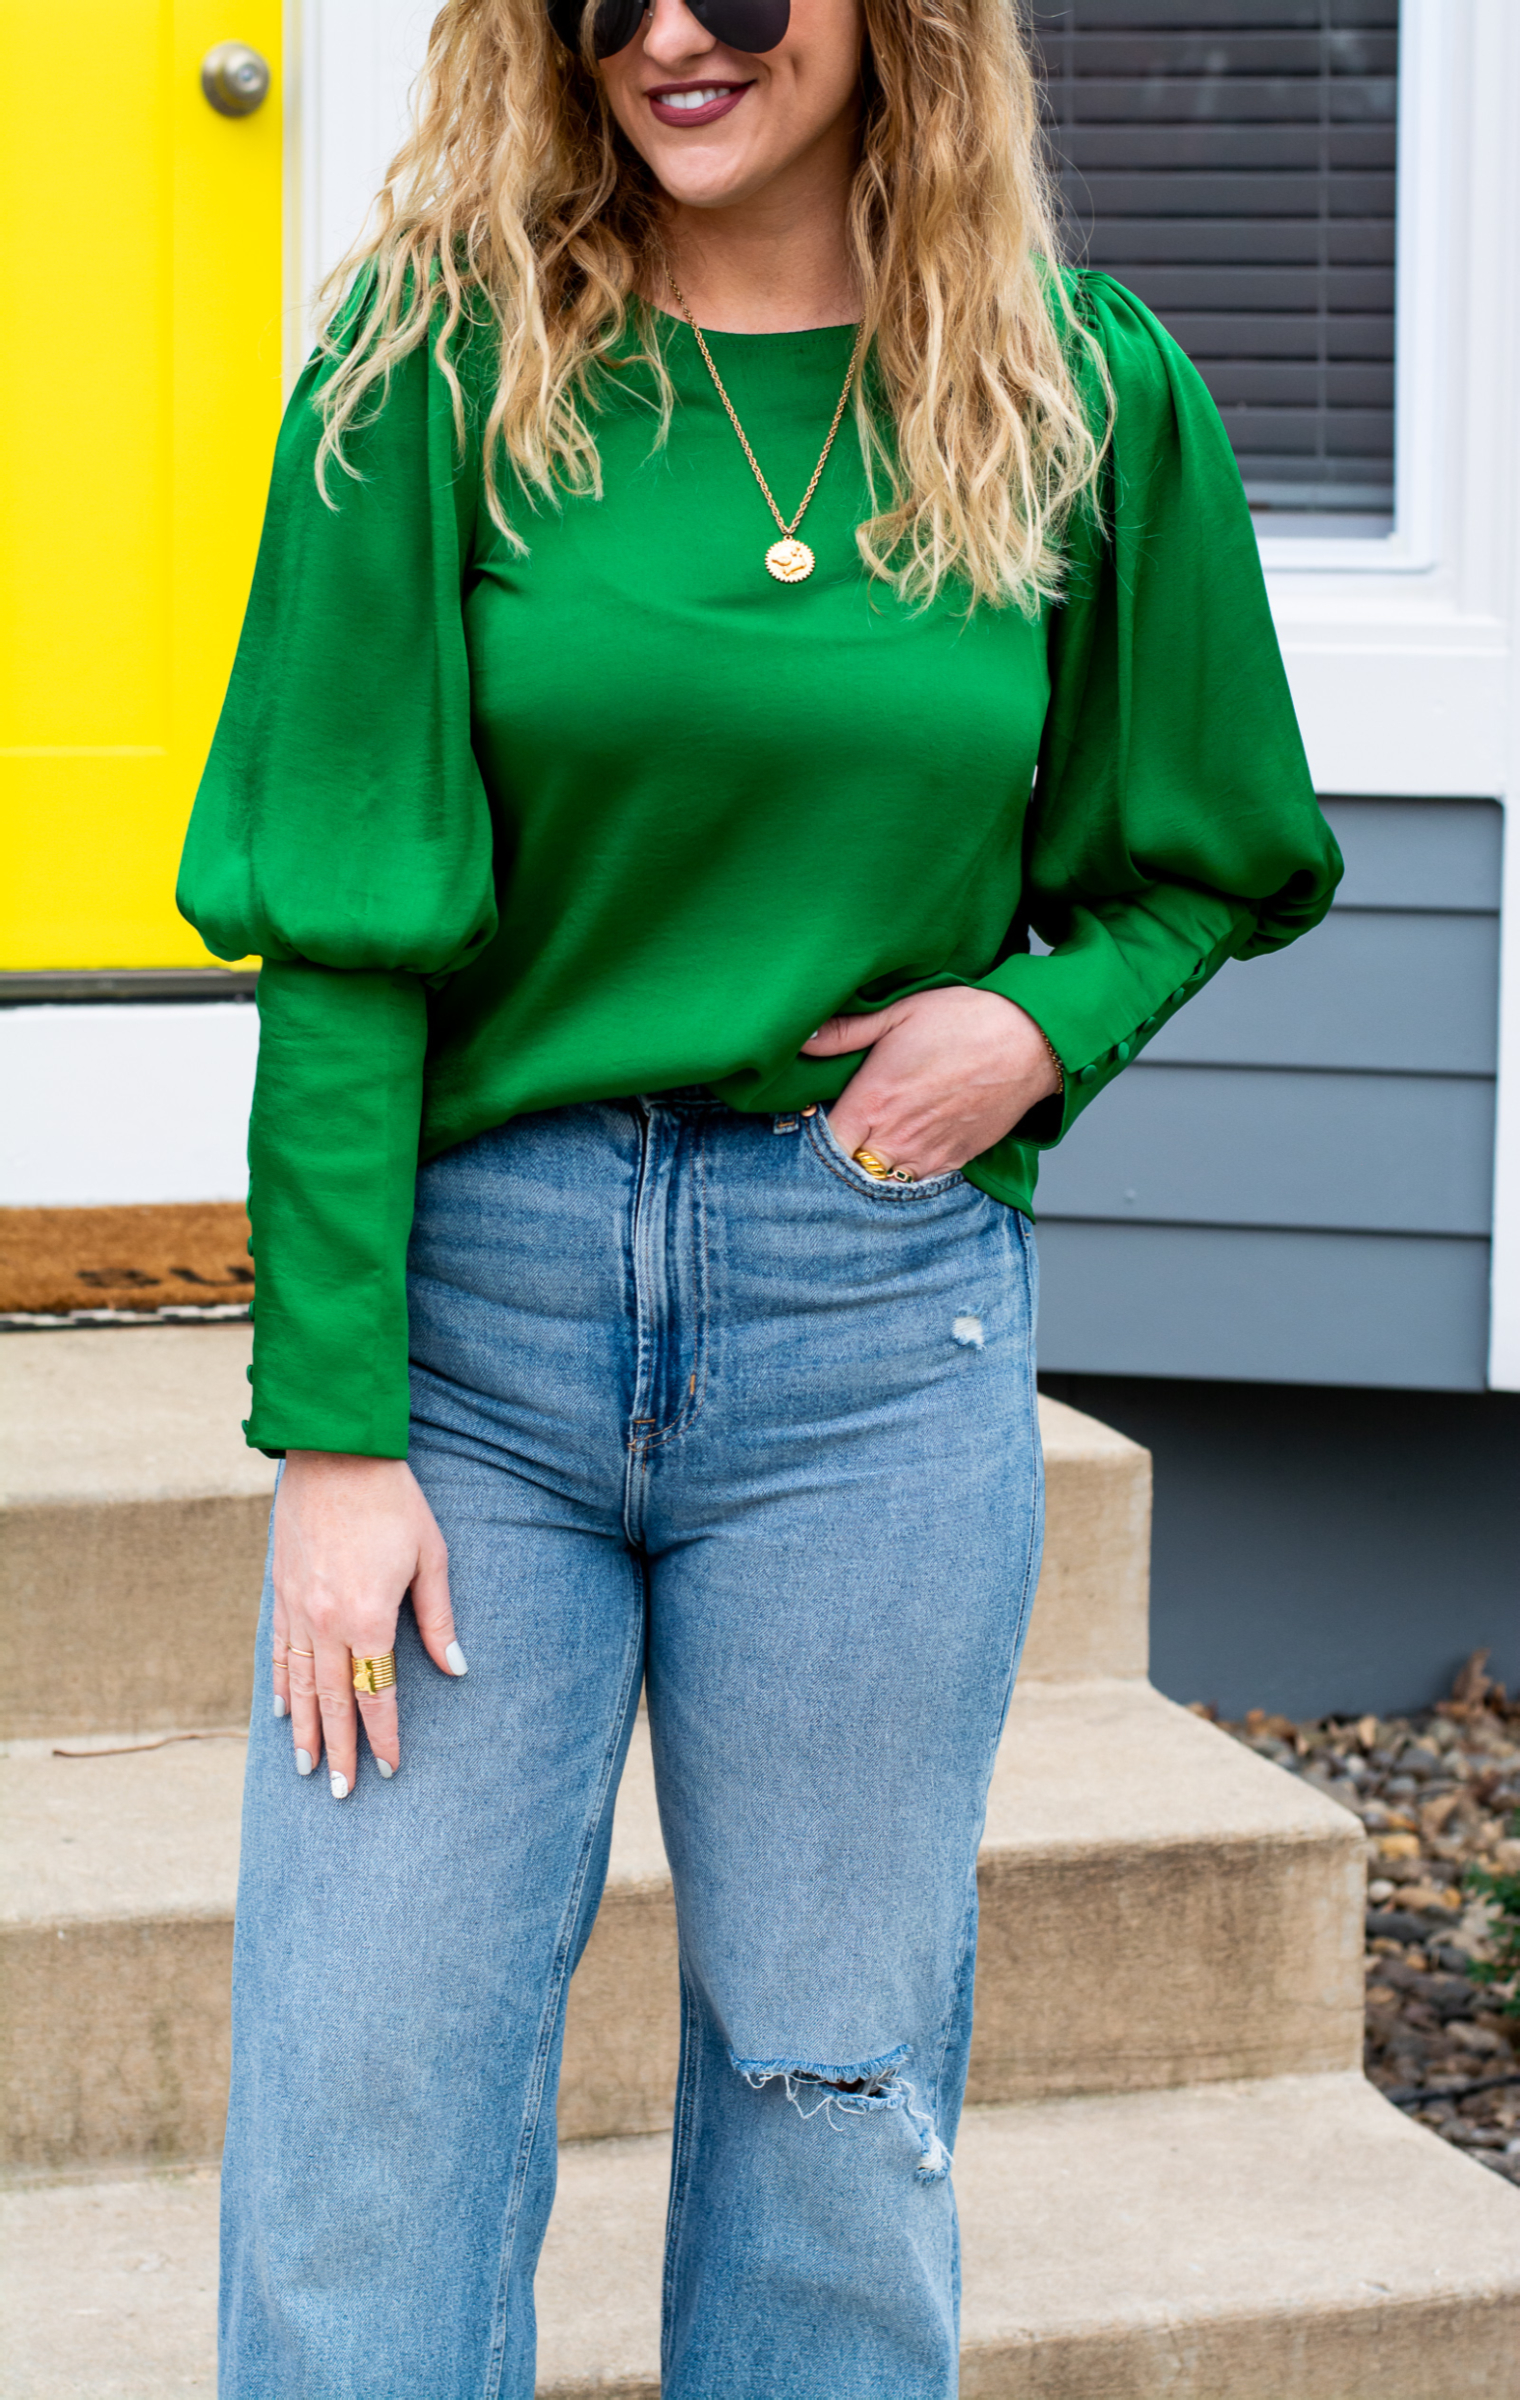 A Jewel Tone Blouse for the Holidays. | LSR